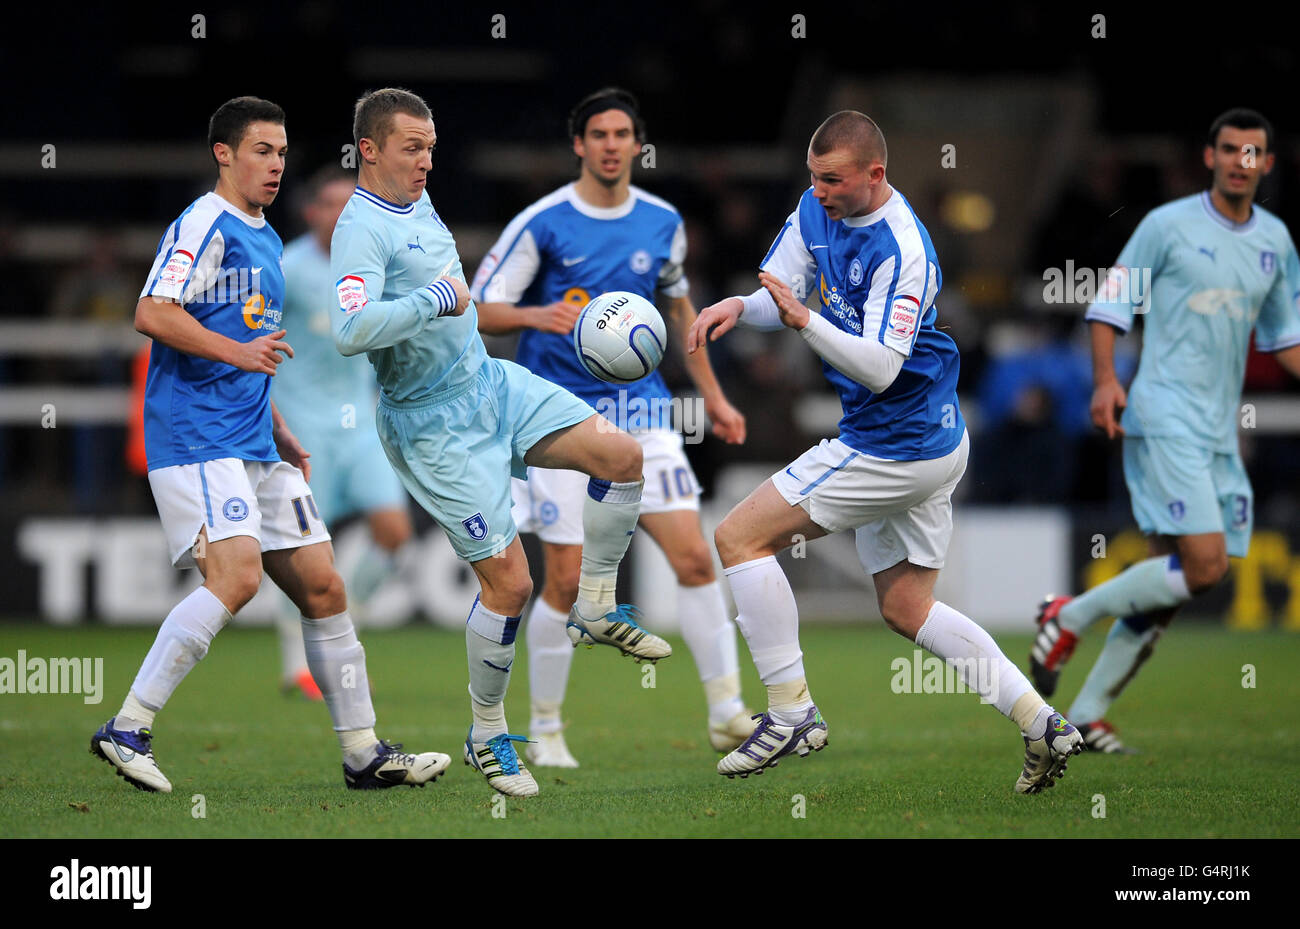 Soccer - npower Football League Championship - Peterborough United v Coventry City - London Road. Coventry City's Gary McSheffrey (2nd left) battles for the ball with Peterborough United's Ryan Tunnicliffe Stock Photo